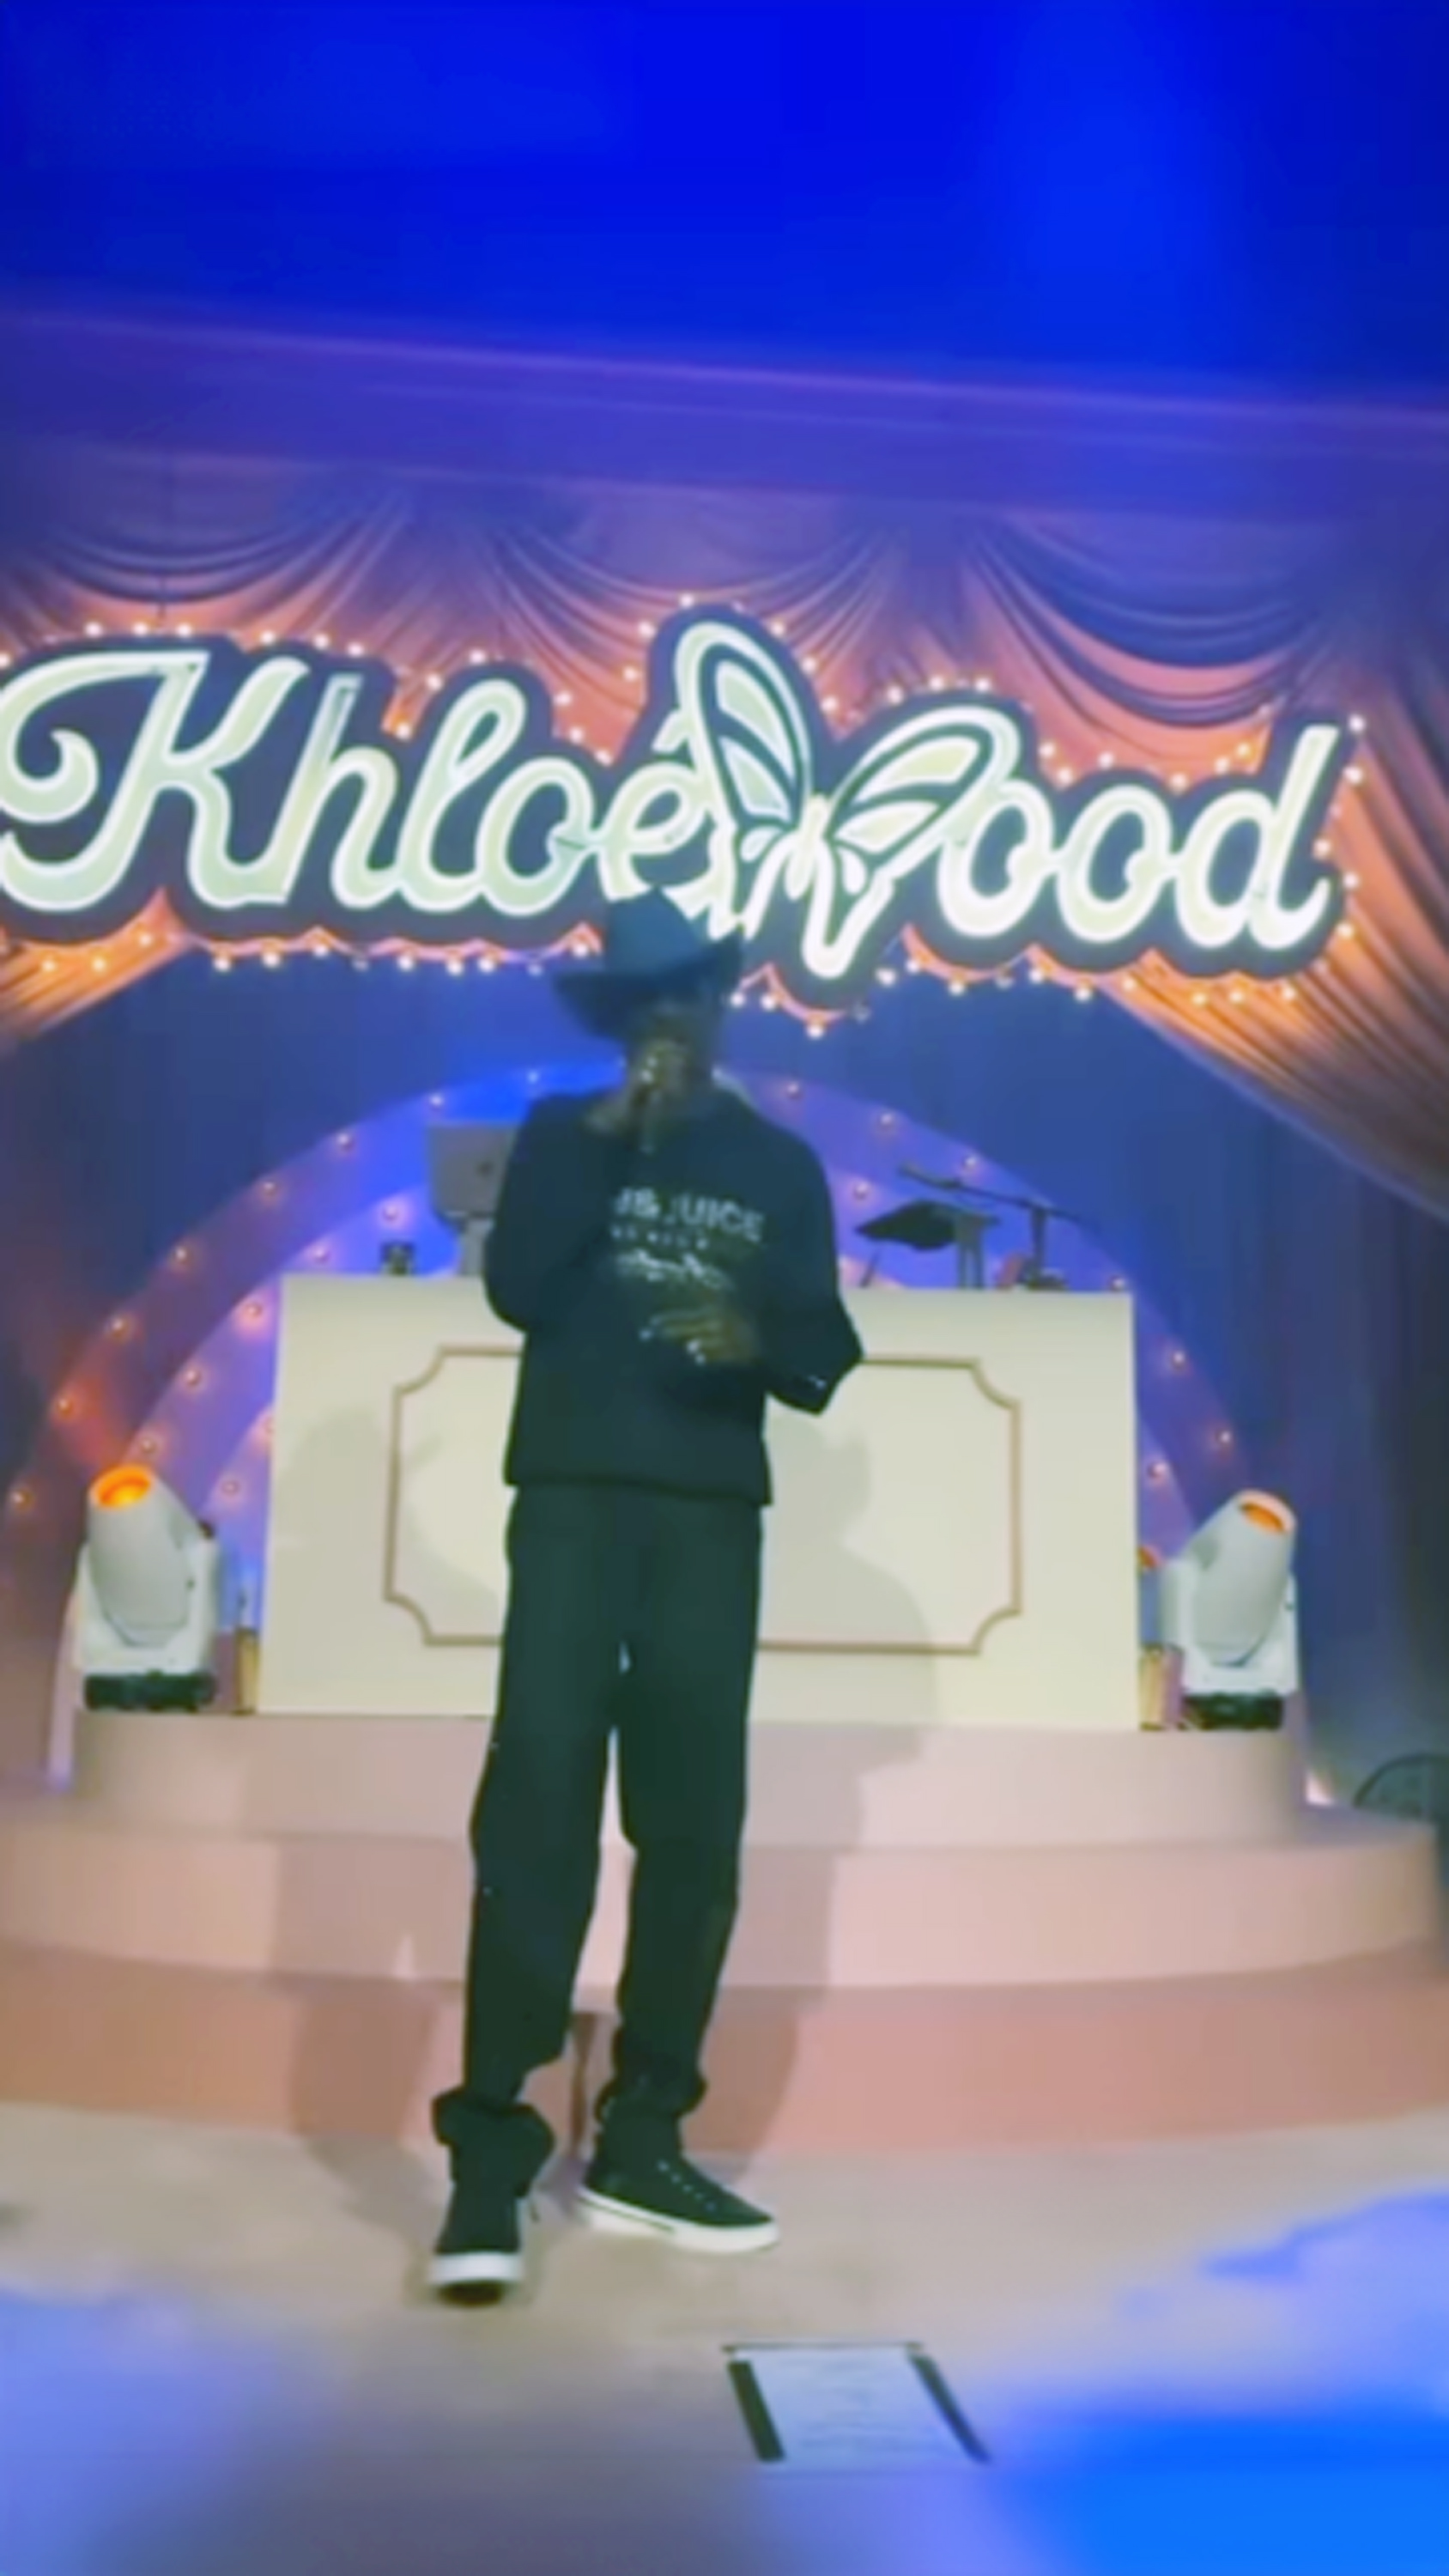 Rapper Snoop Dogg performing at Khloe Kardashian's over-the-top birthday party